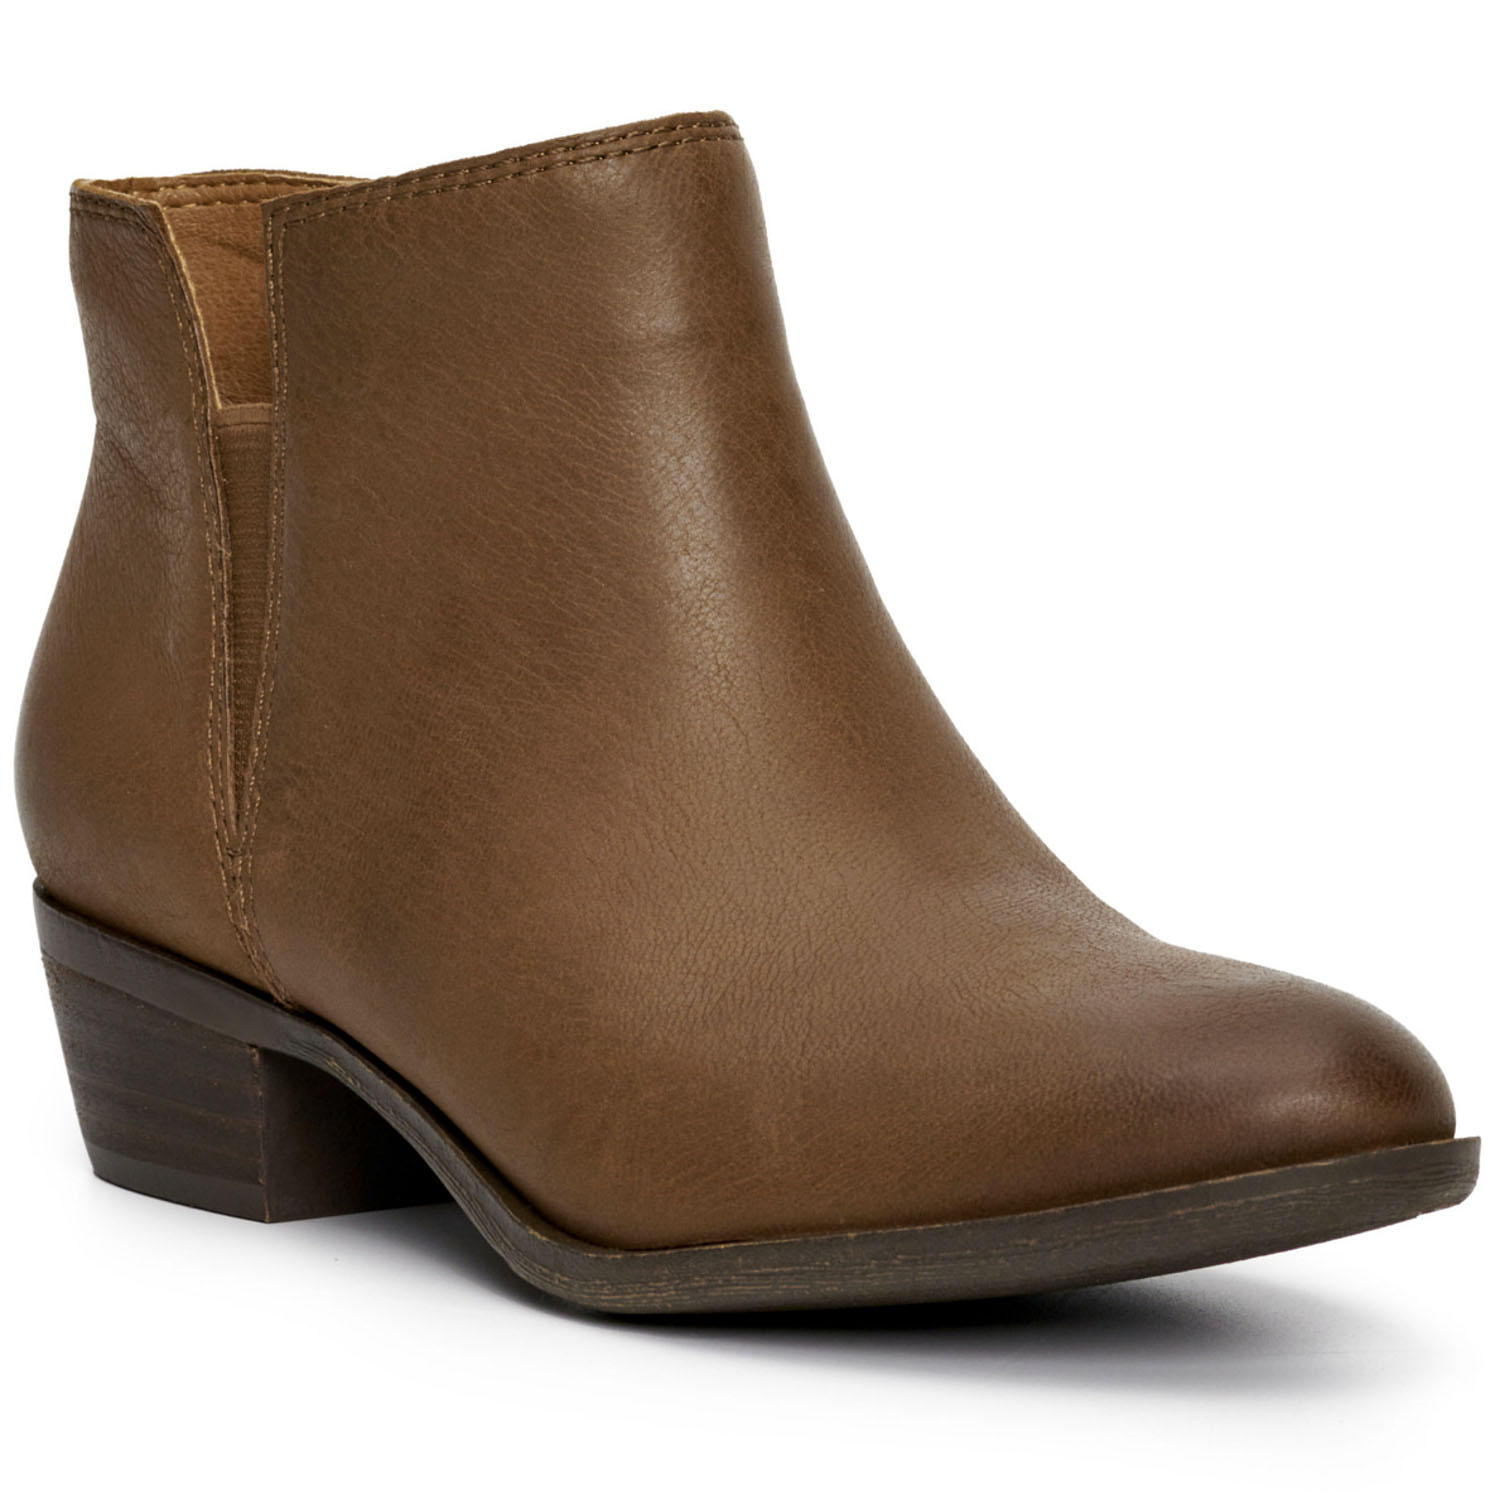 Sam's Club Members: Lucky Brand Women's Ankle Boots (various) $19.80, Steve Madden Women's Faux Fur Slip On Mules (black) $9.80 + Free S/H for Plus Members